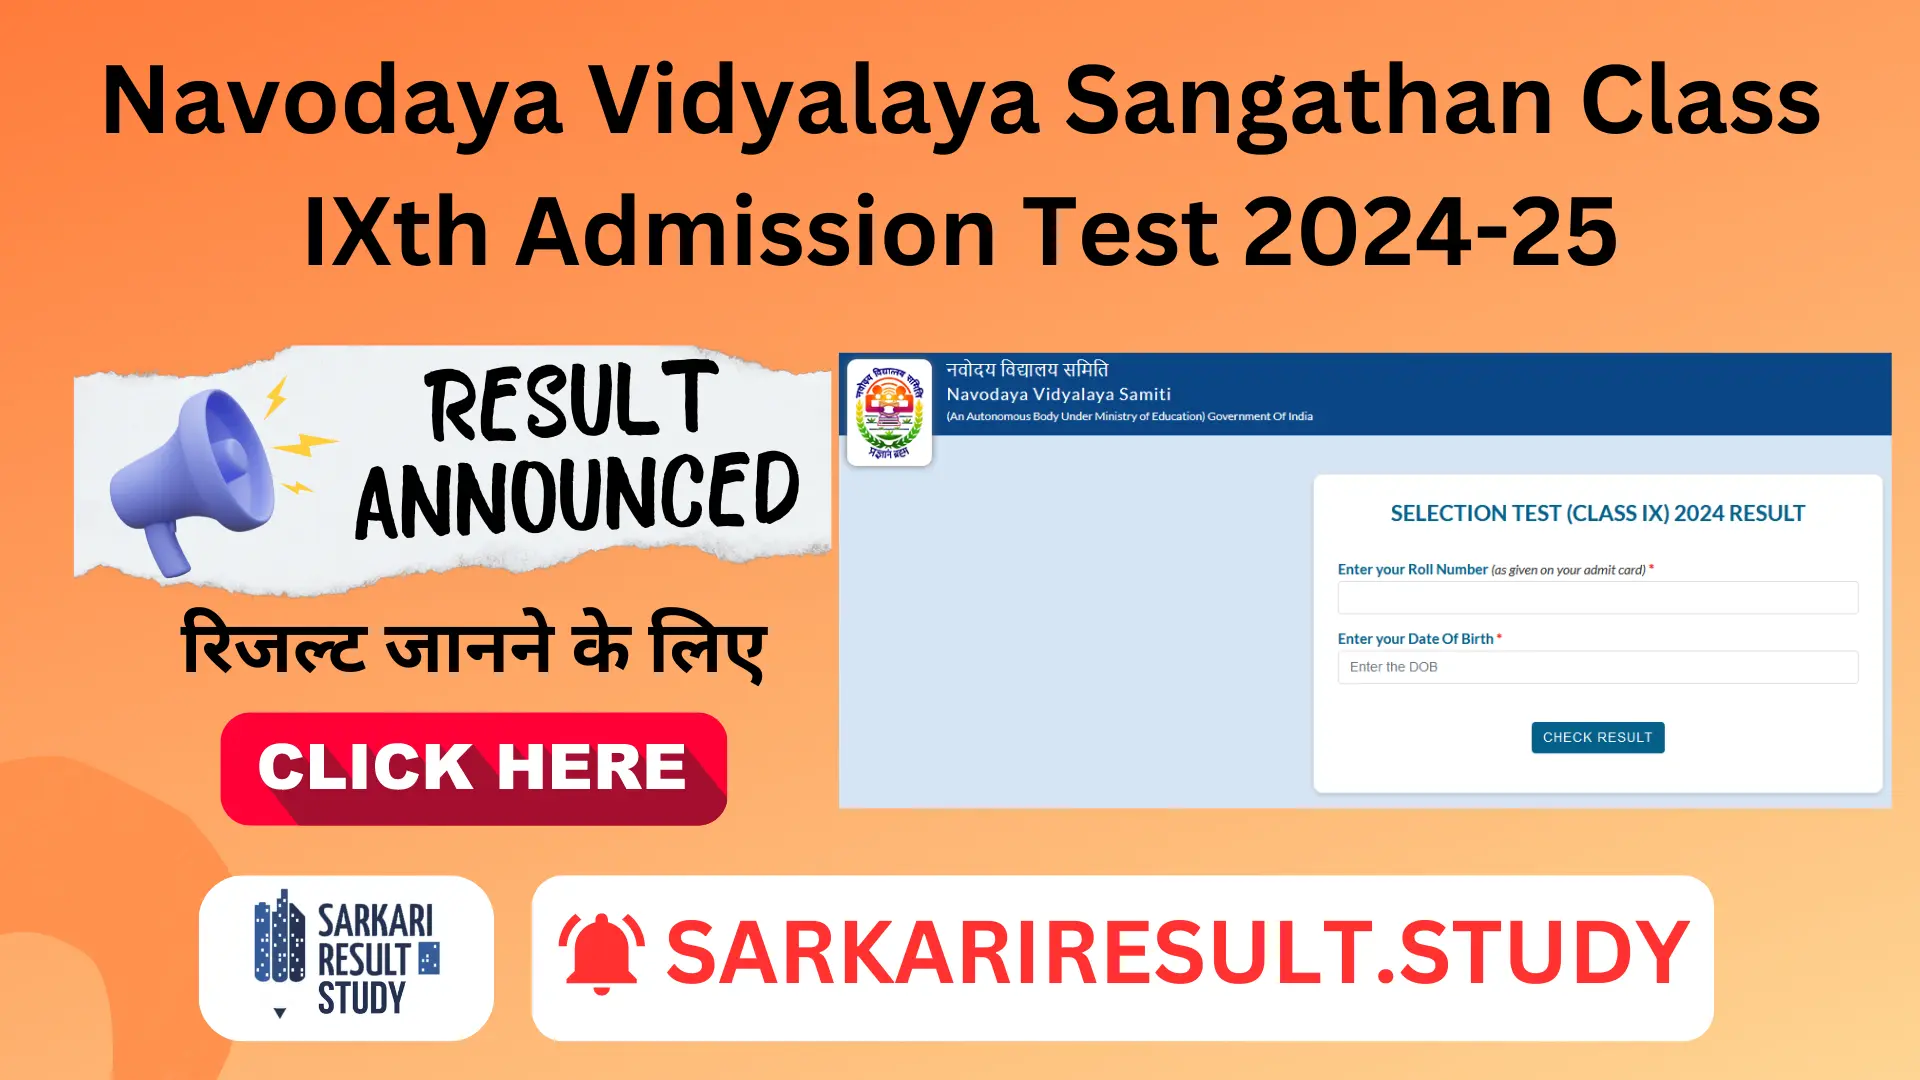 NVS Class 9th Admission Test Result 2024